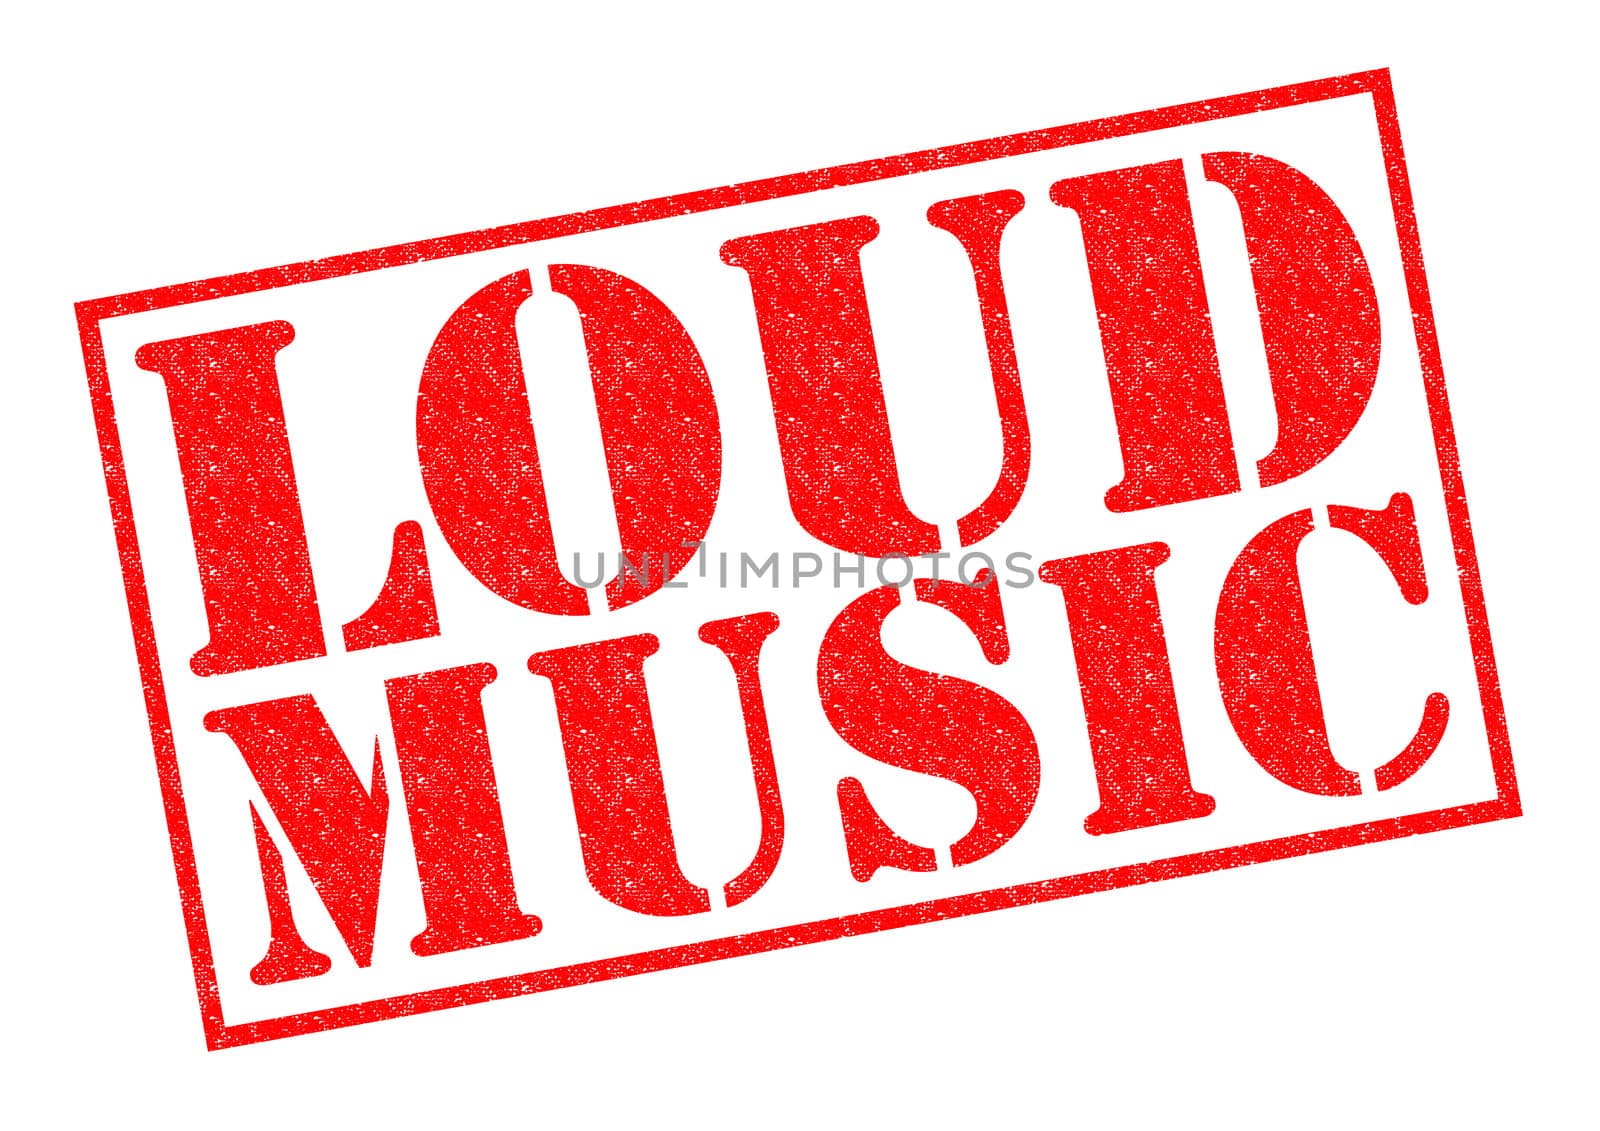 LOUD MUSIC red Rubber Stamp over a white background.